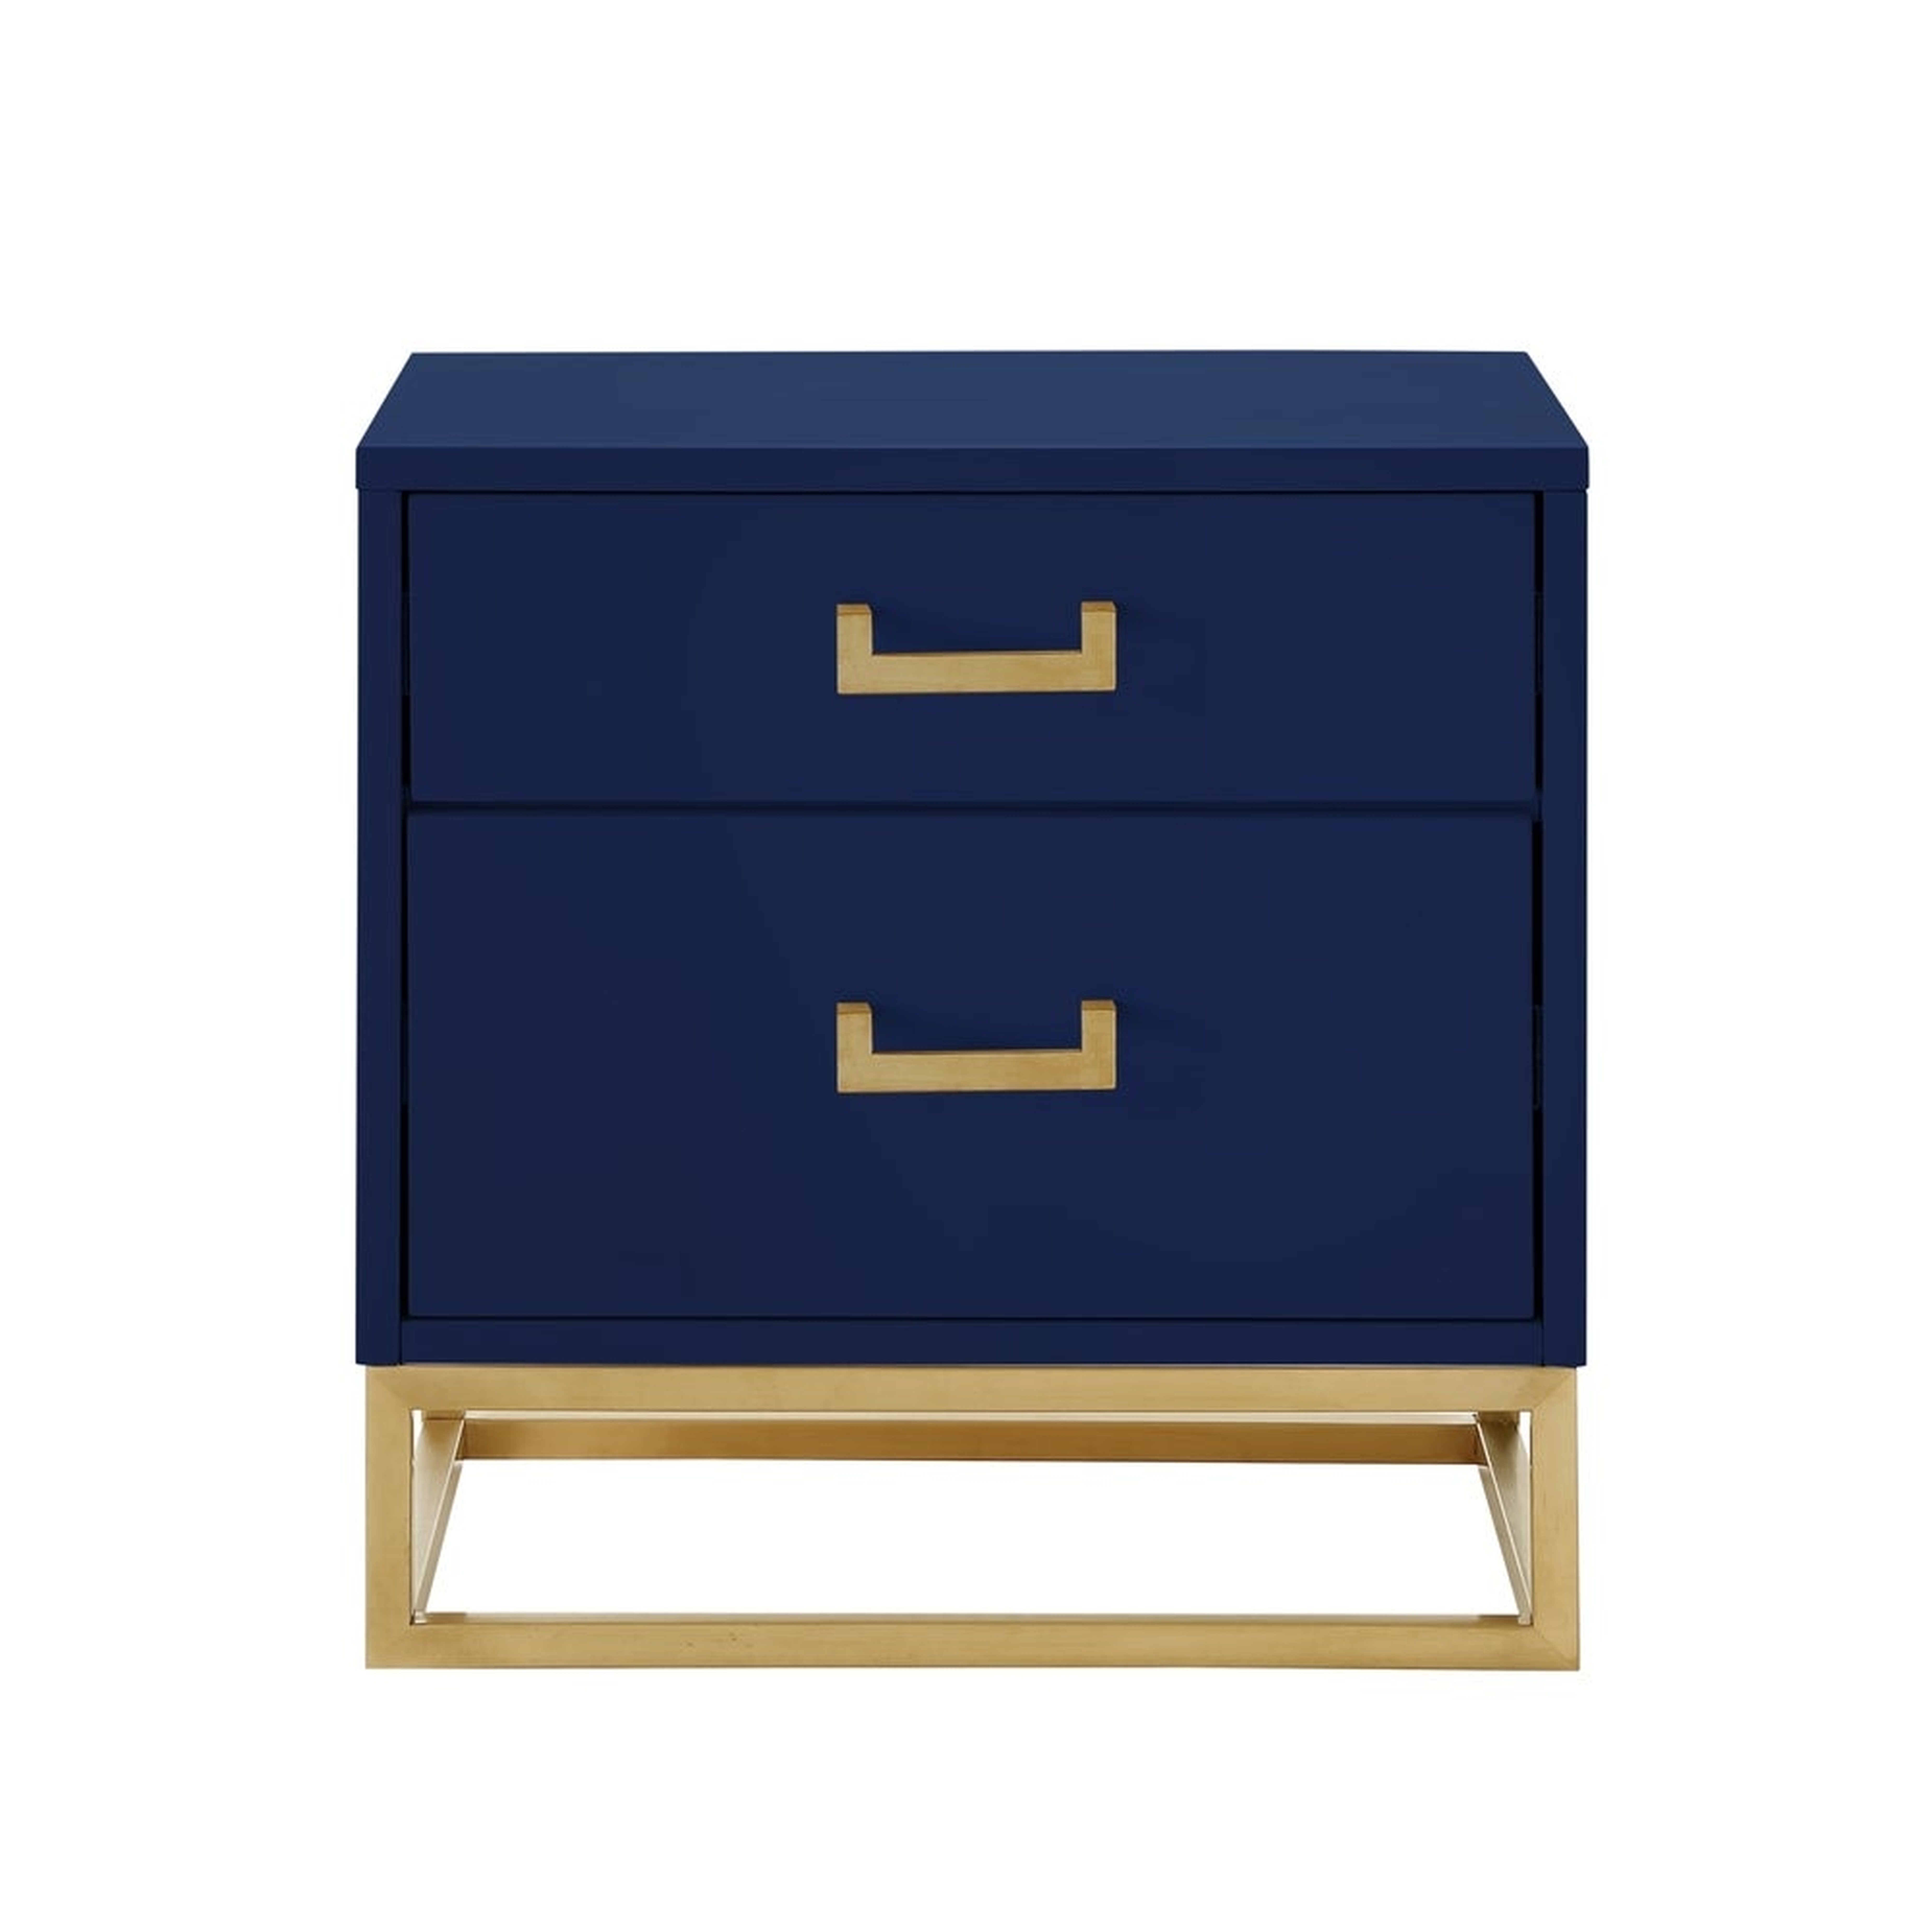 Nicole Miller Jin Side Table Nightstand High Gloss with Metal Base - Navy-Gold - Overstock